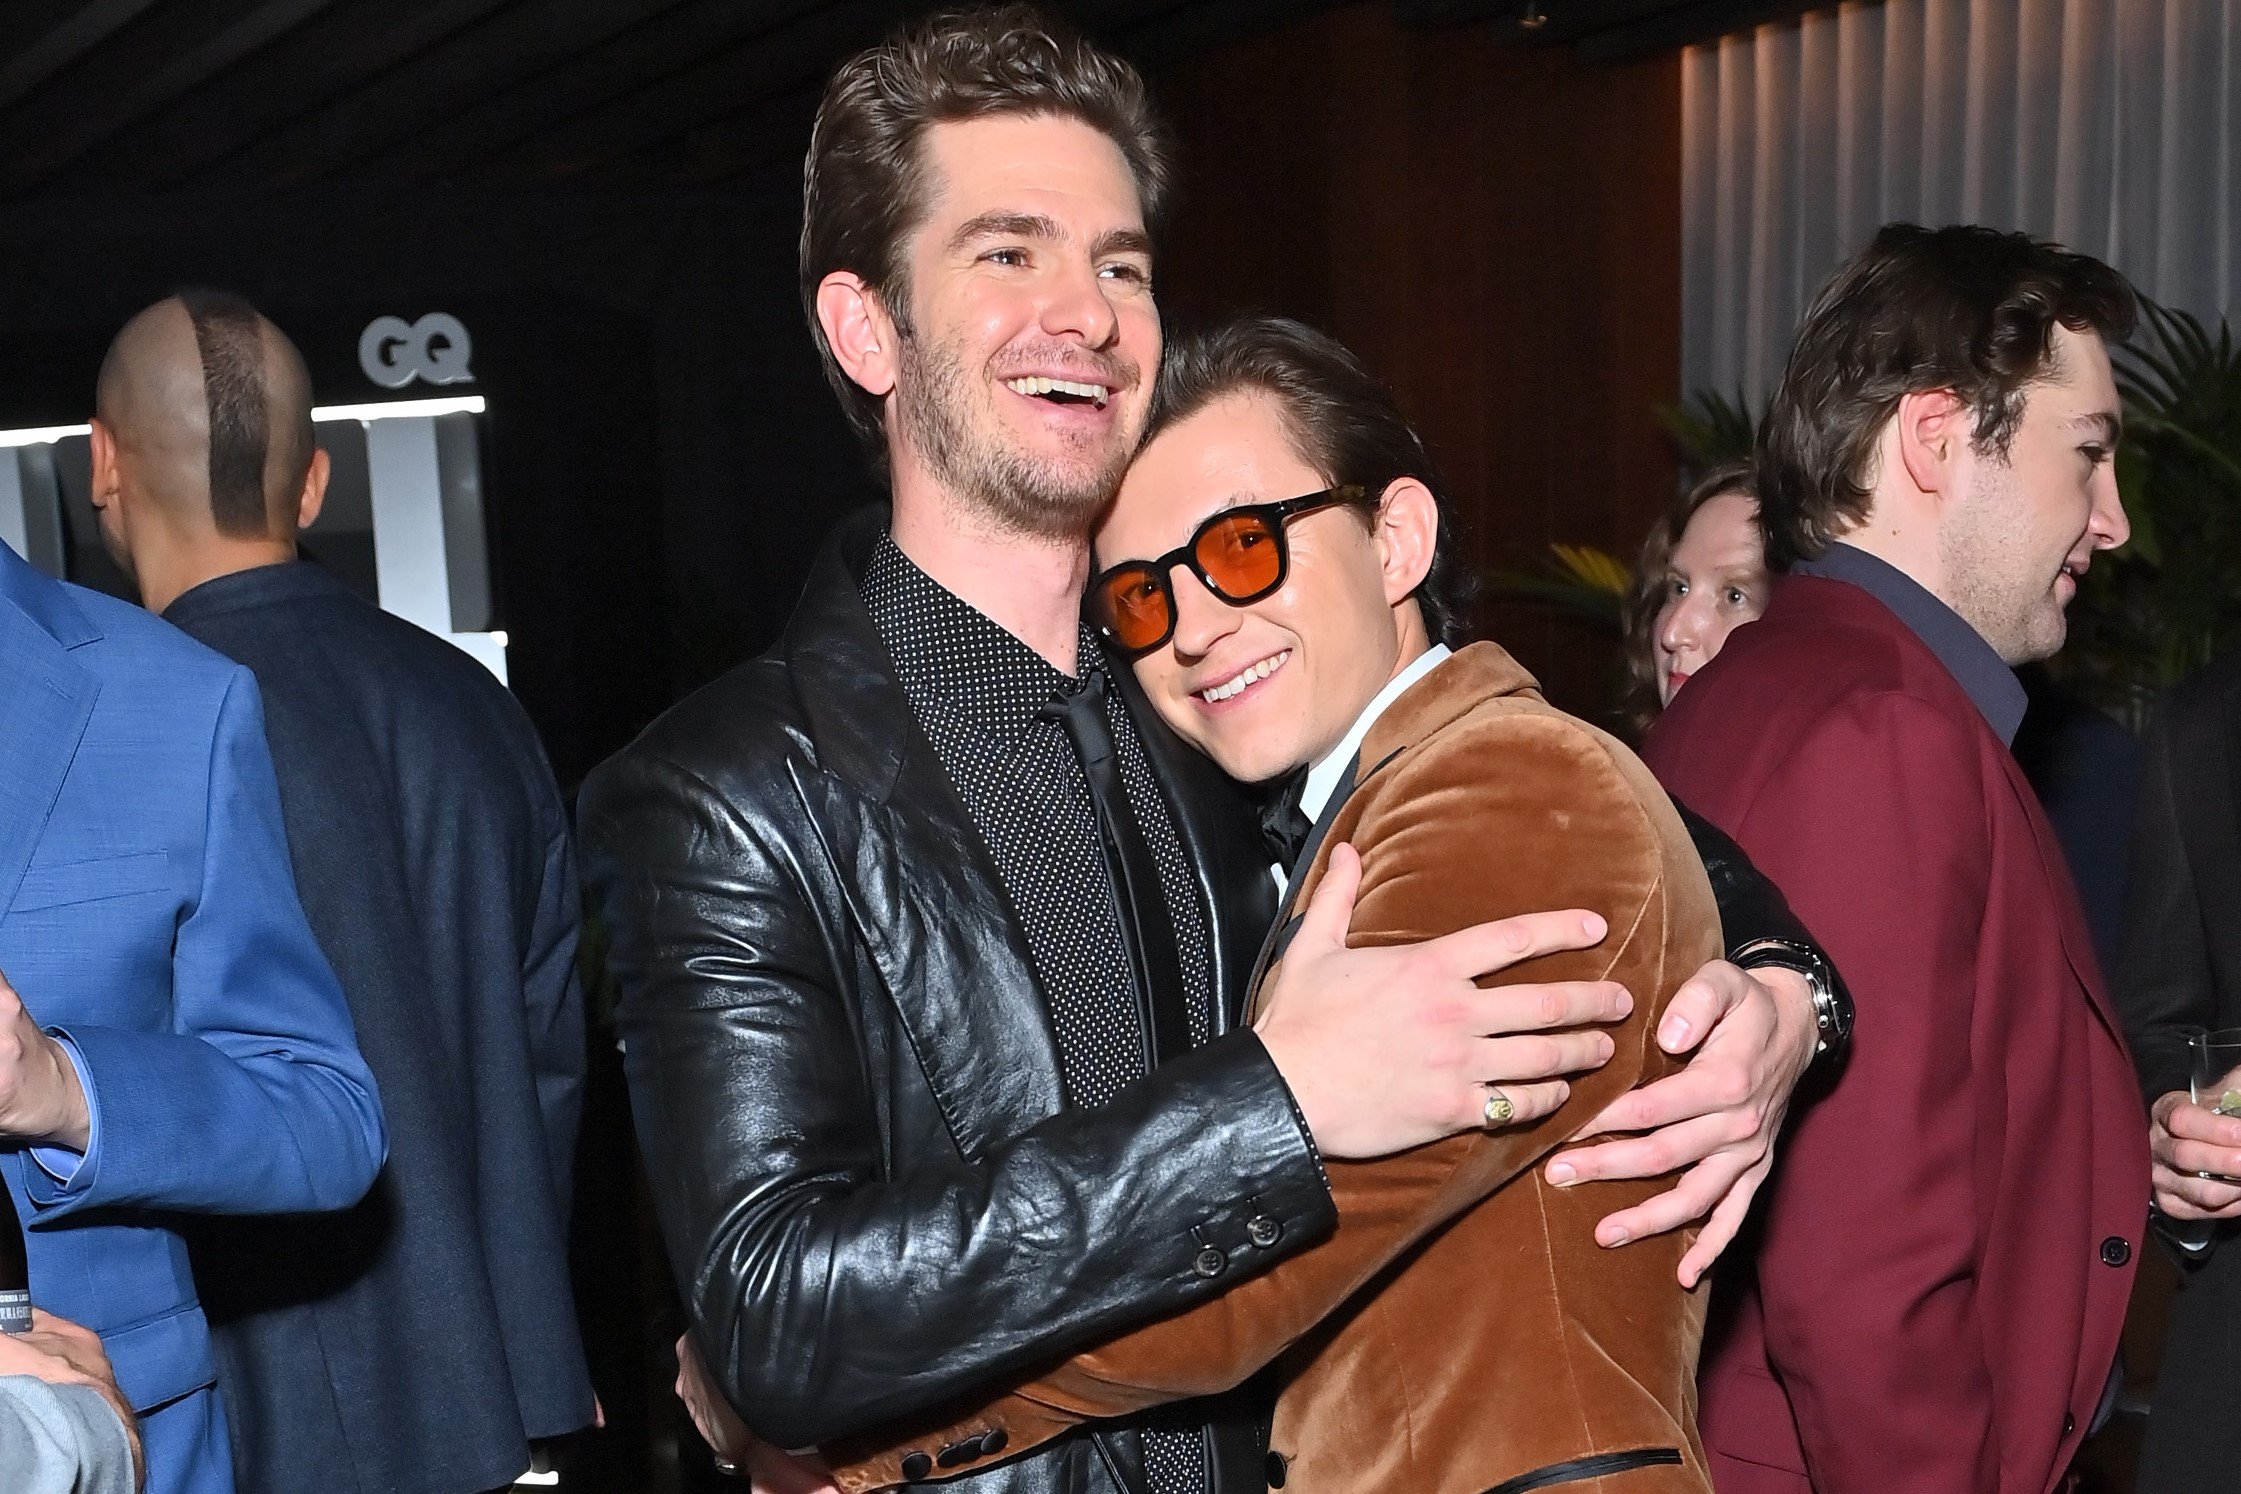 'Spider-Man: No Way Home' star Tom Holland embraces Andrew Garfield. Holland wears a light brown velvet suit jacket and orange-tinted glasses. Garfield wears a black leather jacket over a black button-up shirt with white polka dots and a black tie. Andrew Garfield, along with Tobey Maguire, are rumored to appear in 'Spider-Man: No Way Home.'